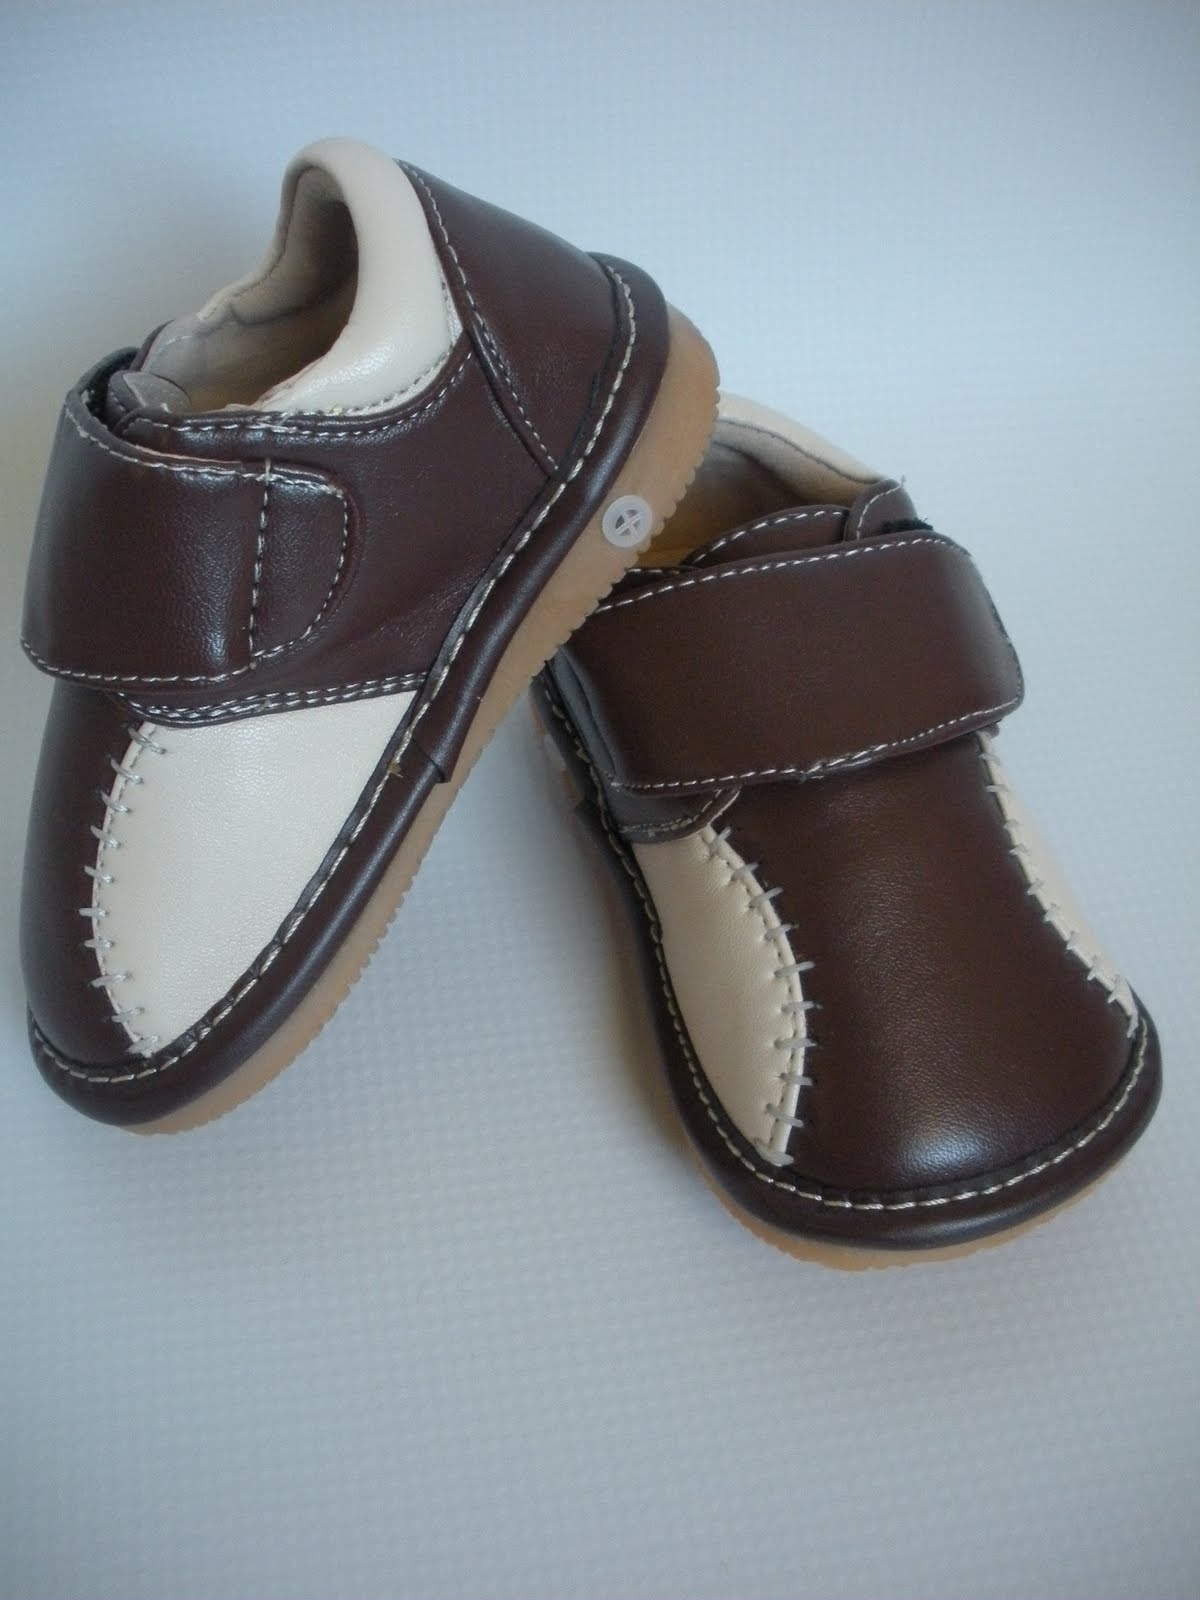 Squeaky Shoes for Tiny Tots: Boys Squeaky Shoes